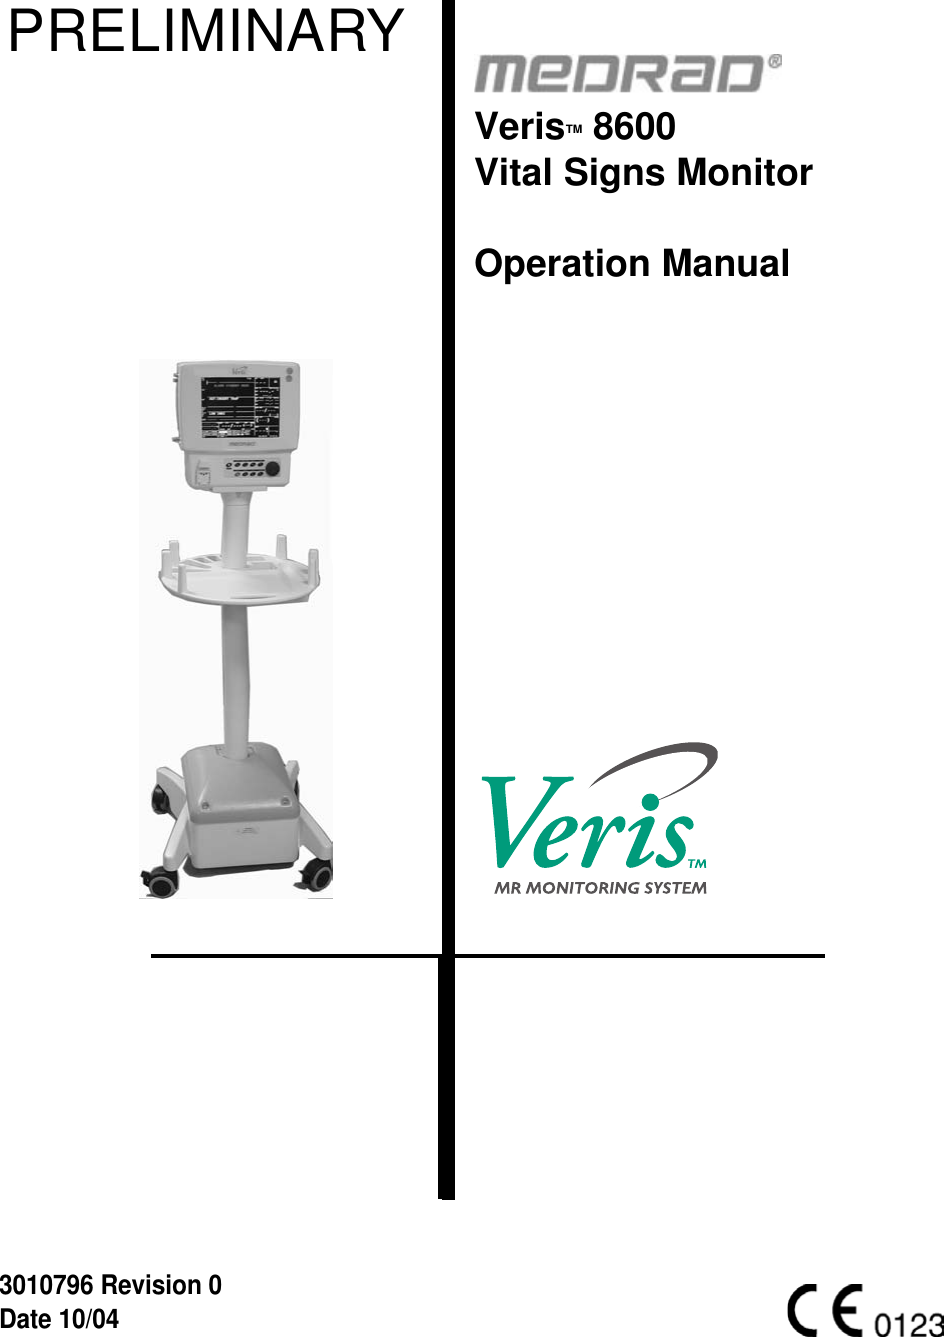 Page iVerisTM 8600 Vital Signs MonitorOperation Manual3010796 Revision 0 Date 10/04PRELIMINARY